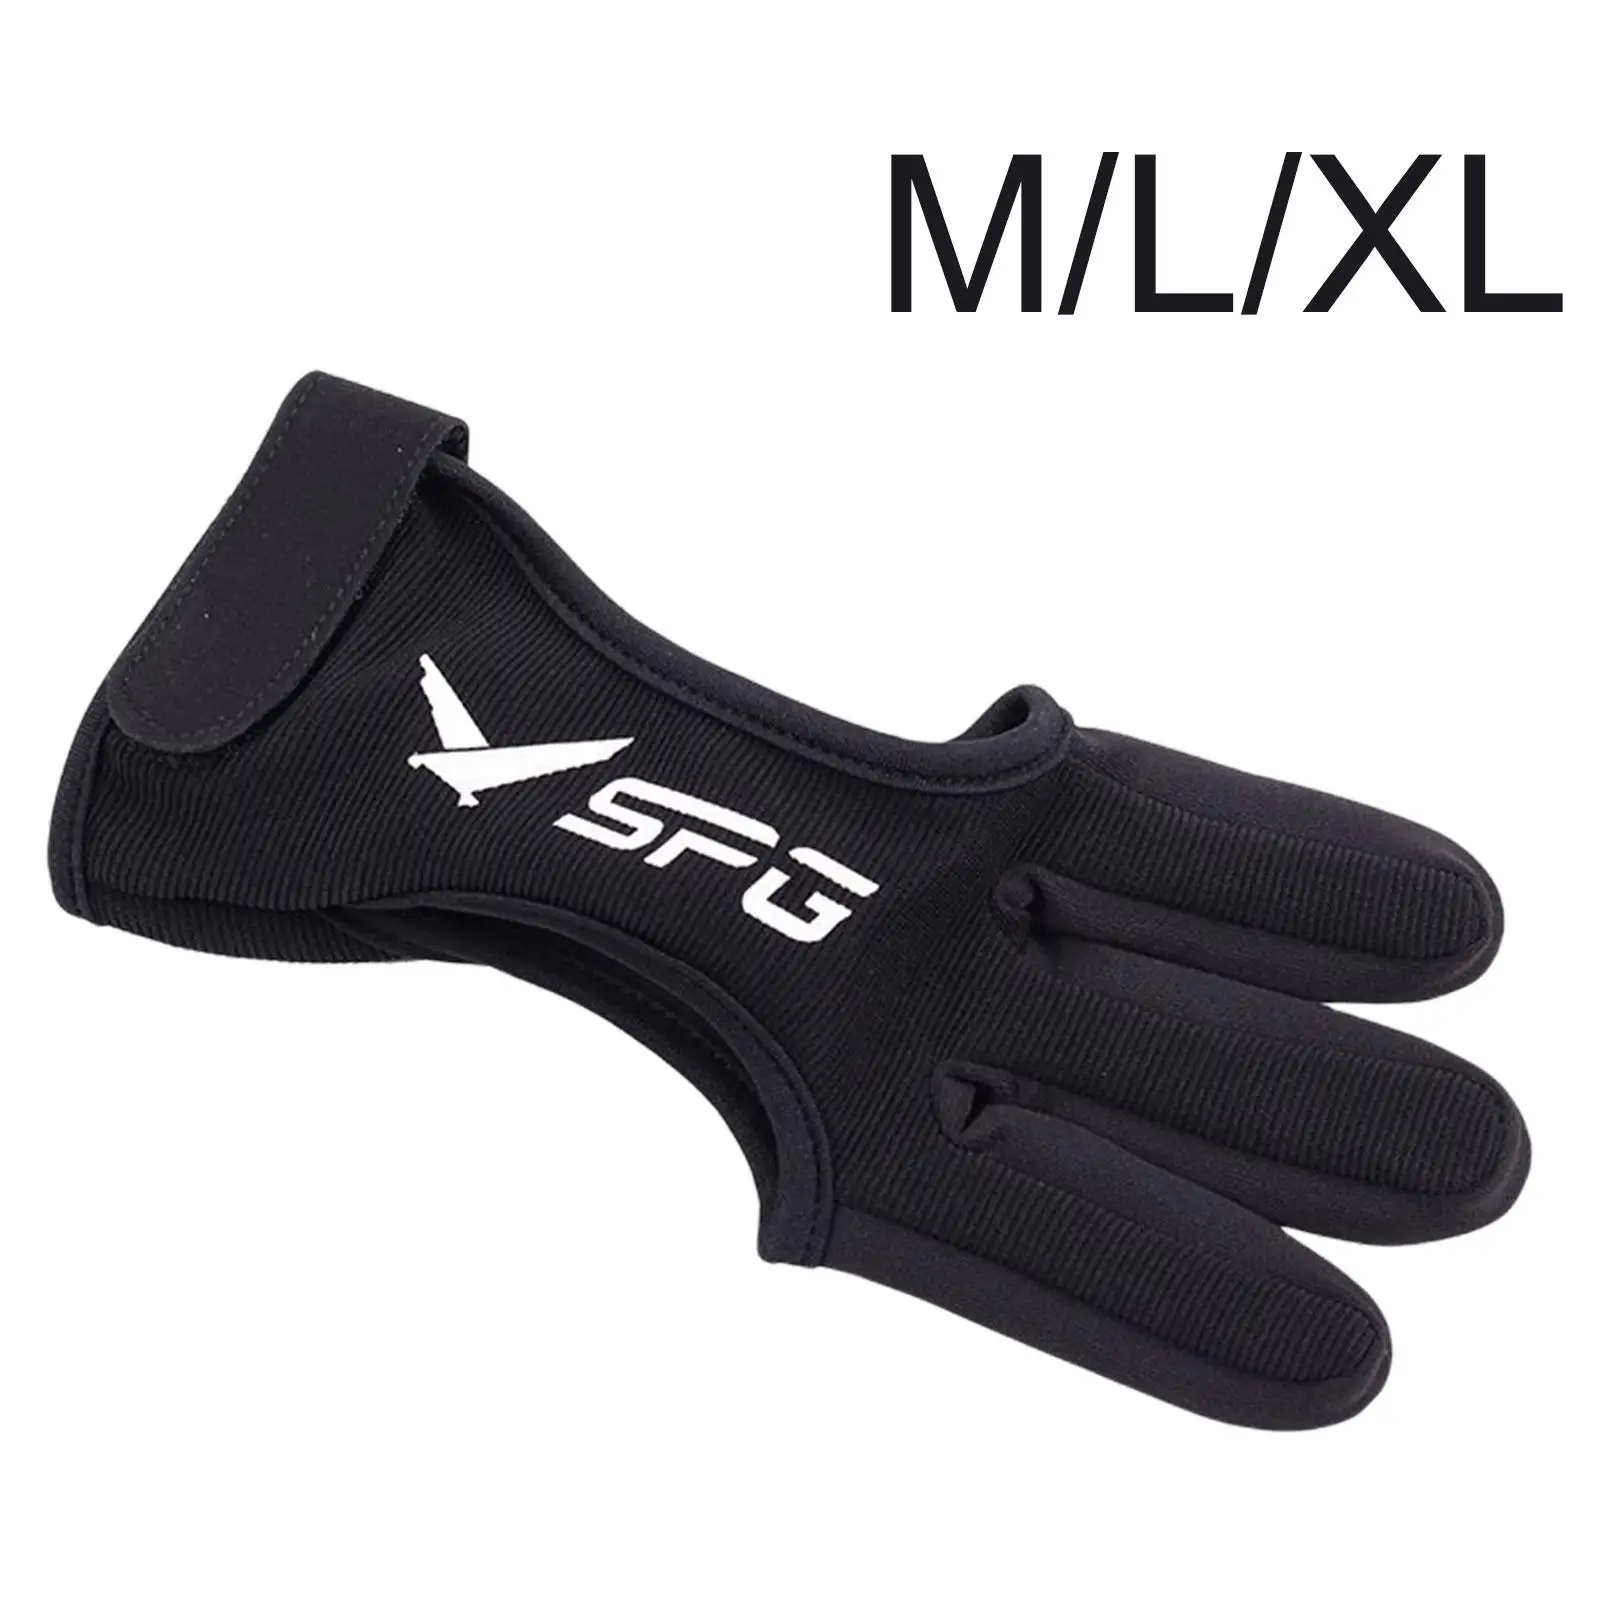 Durable Archery Glove 3 Fingers Guard Training Aids Hunting Glove fot Youth